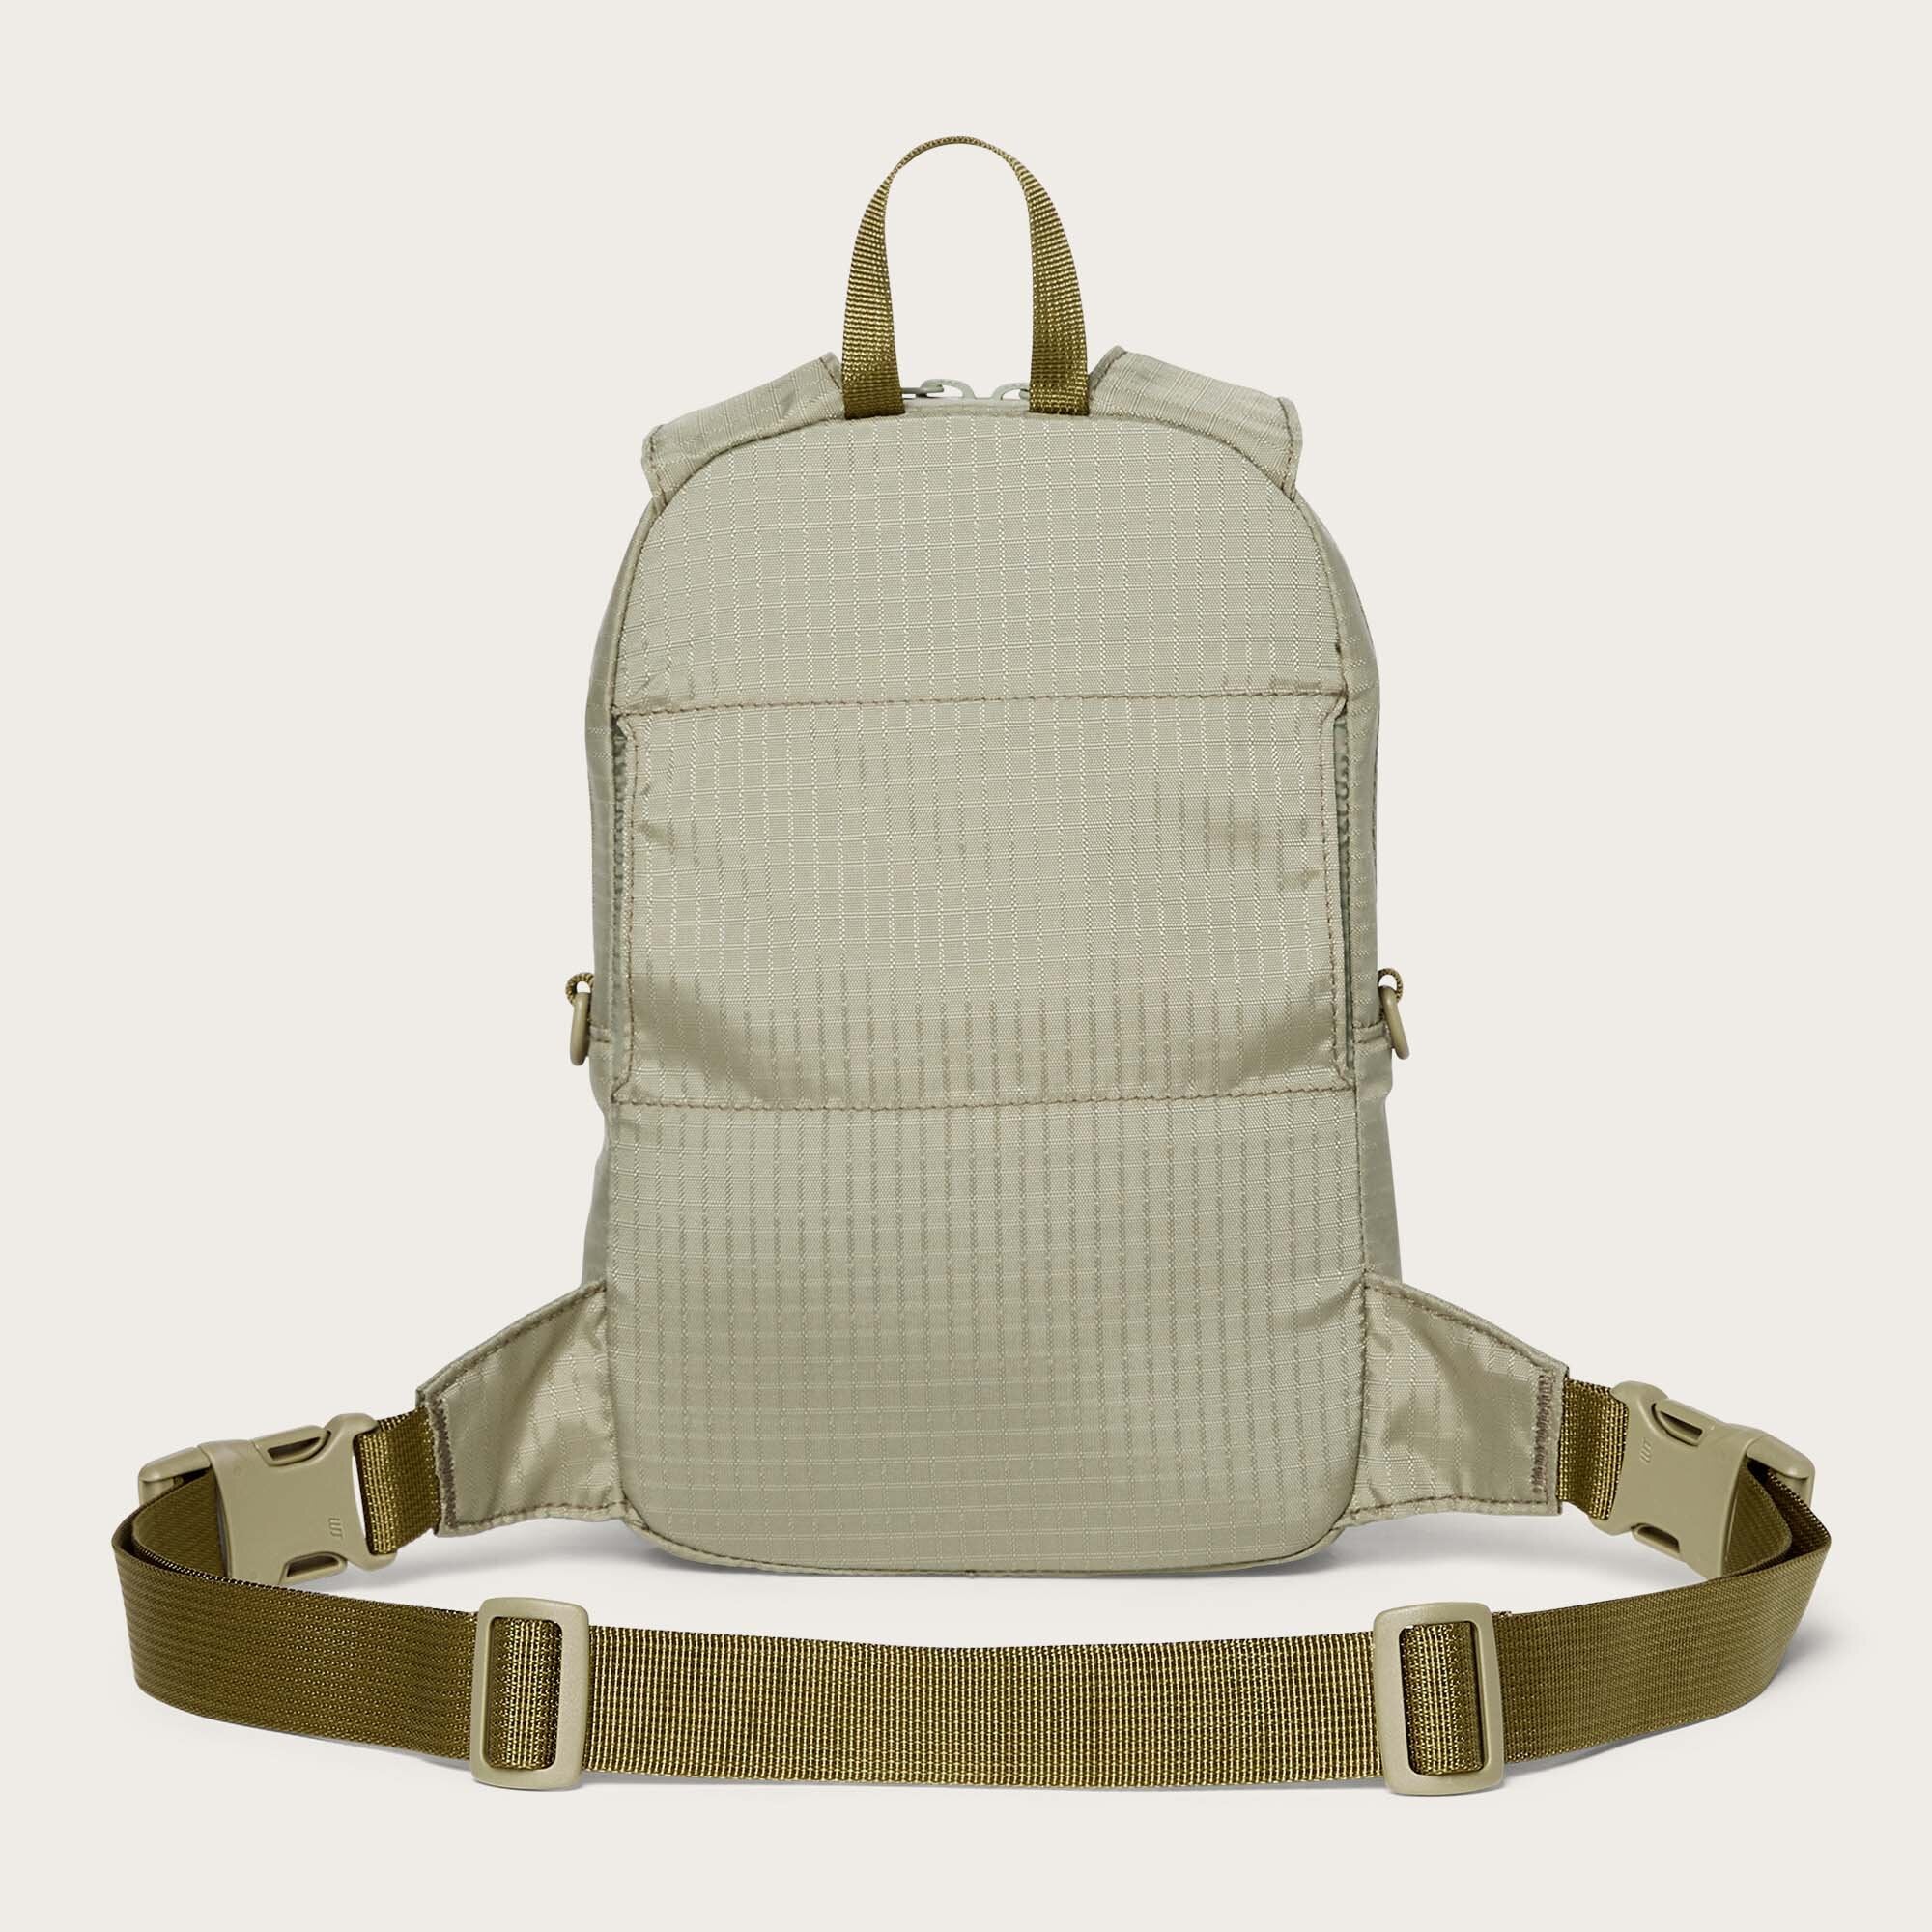 Filson 100% Waterproof Fly Fishing Bag - No Gear Included – Rigged